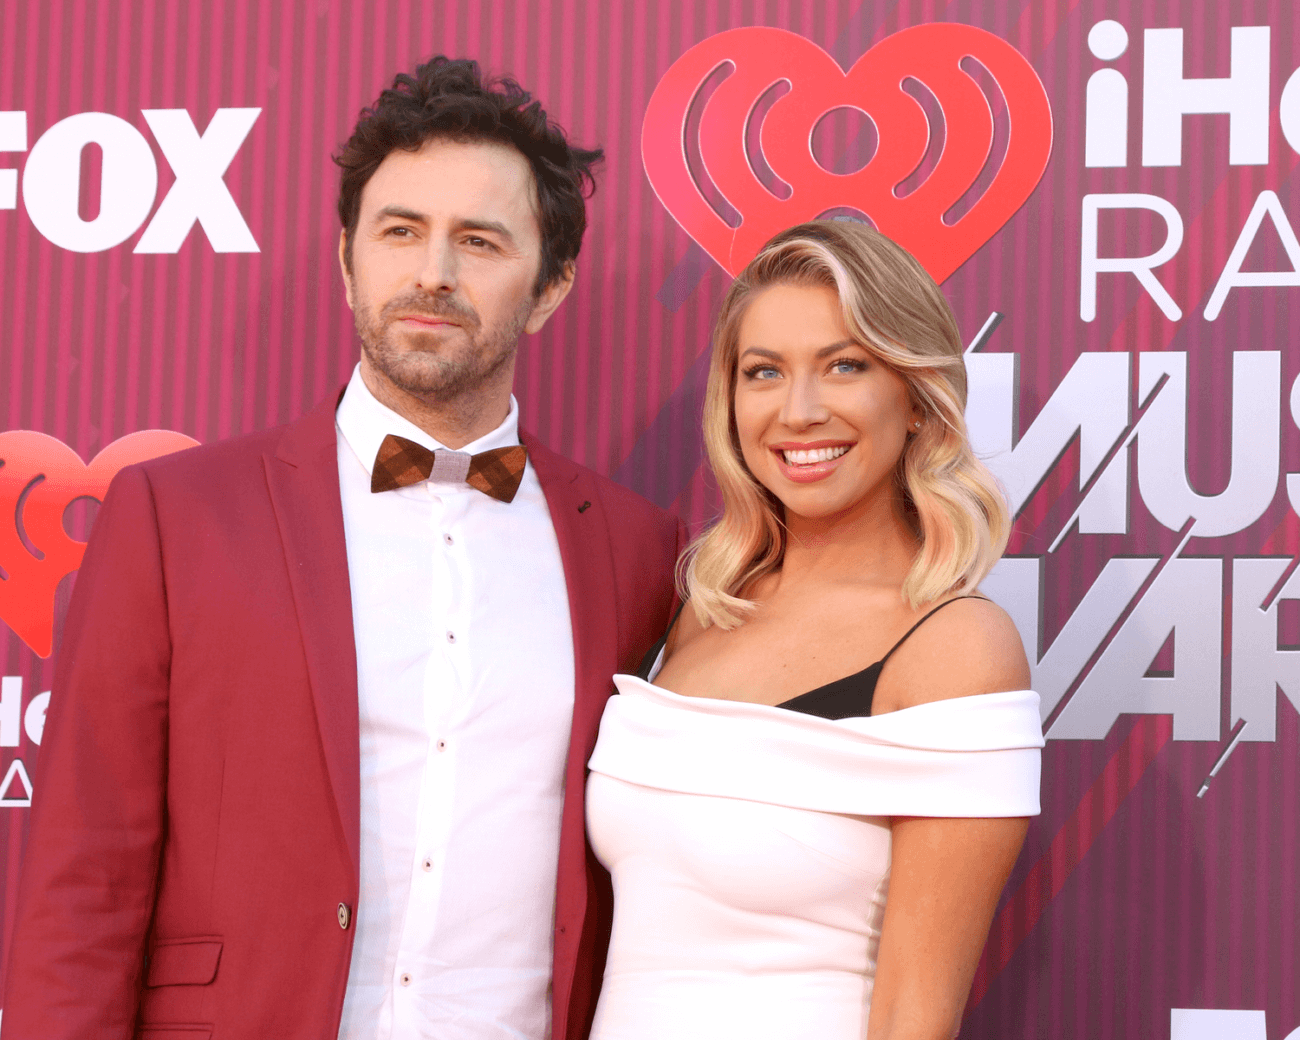 Everyone Knew Stassi Schroeder Was Racist - They Just Chose to Ignore It